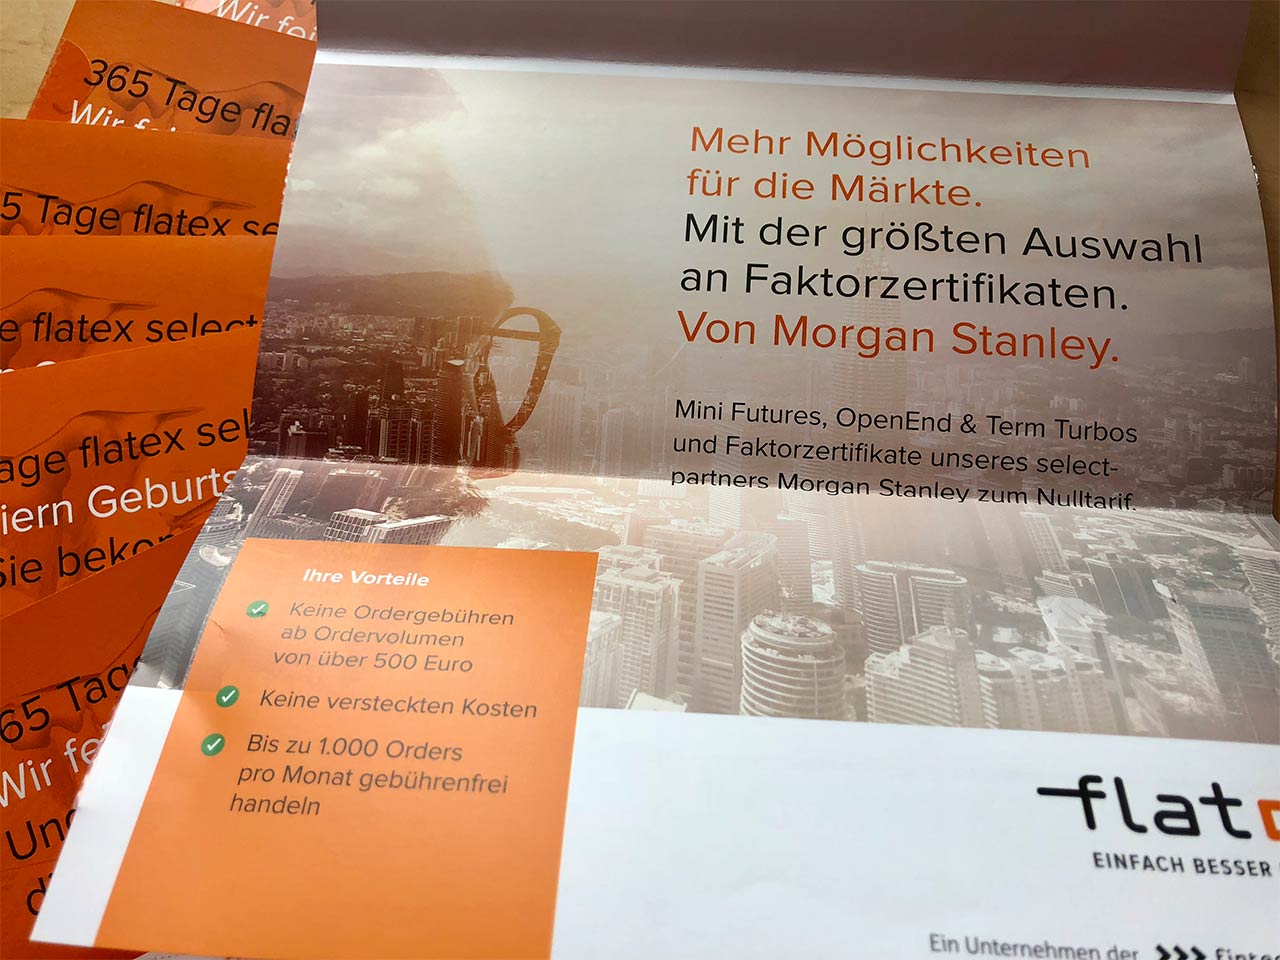 flatex 365 Tage select Direct Mailing Mehr für die Märkte More for the markets